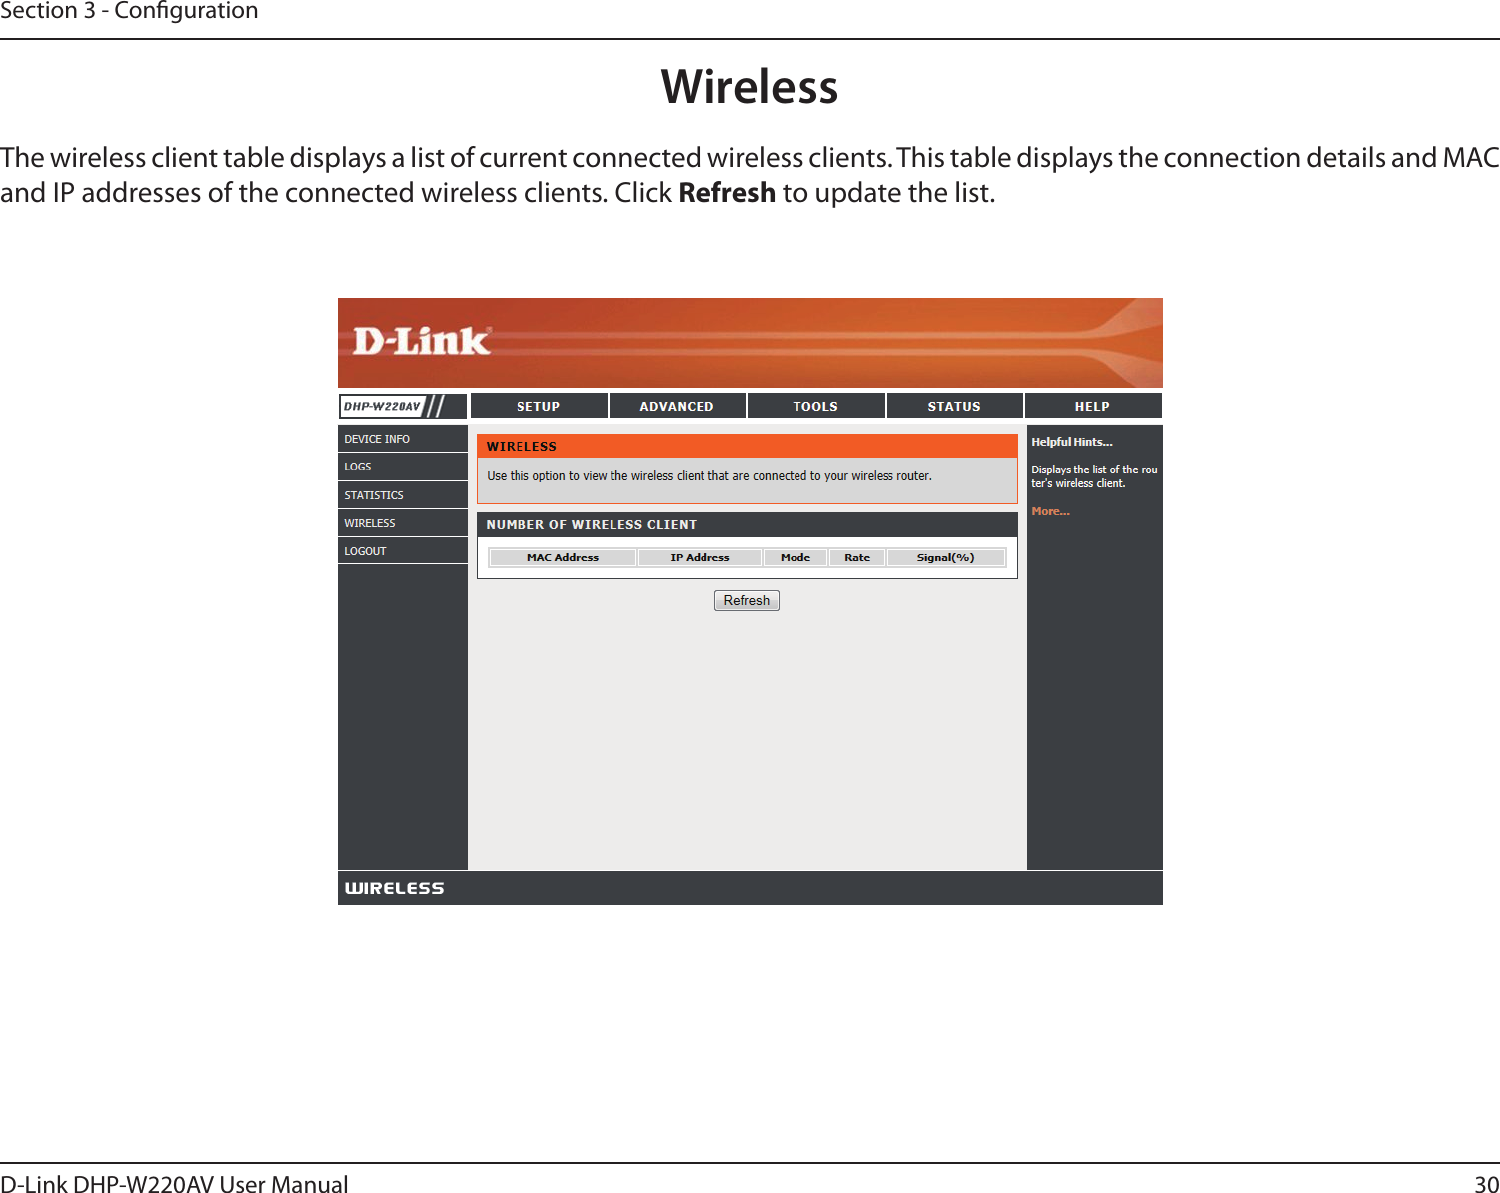 30D-Link DHP-W220AV User ManualSection 3 - CongurationWirelessThe wireless client table displays a list of current connected wireless clients. This table displays the connection details and MAC and IP addresses of the connected wireless clients. Click Refresh to update the list.